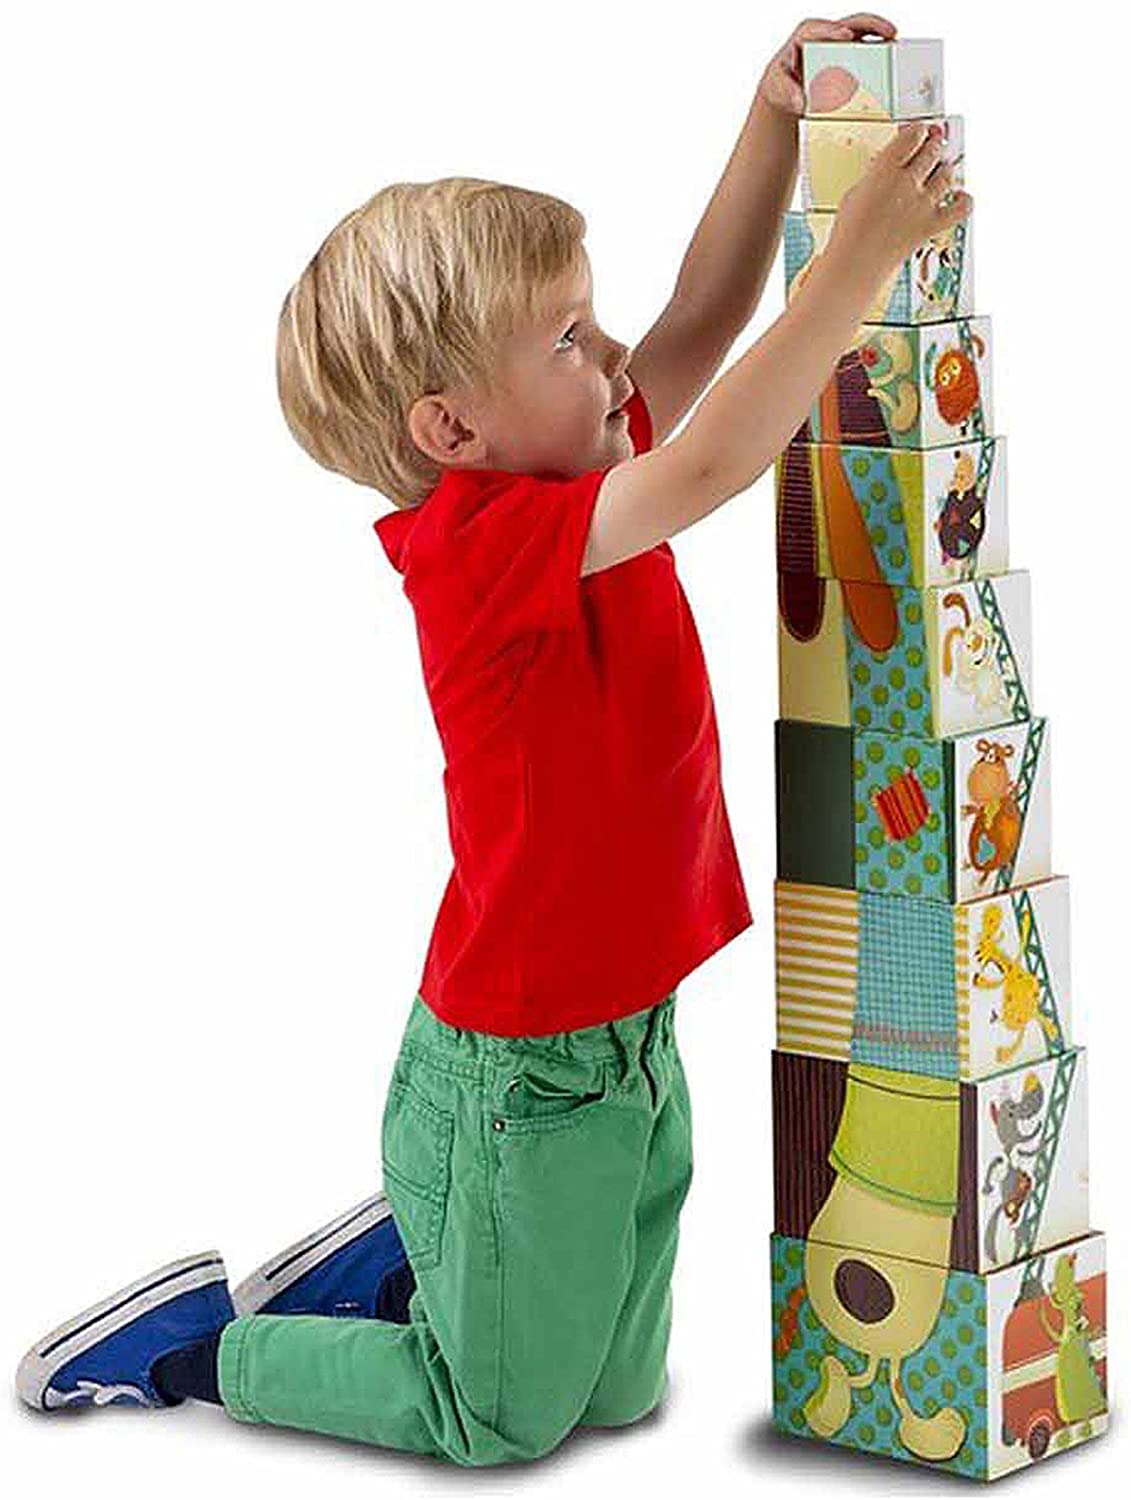 Lilliputiens 86429 – Pyramid With The Dogs Jef – Stacking Toy 10 Cube